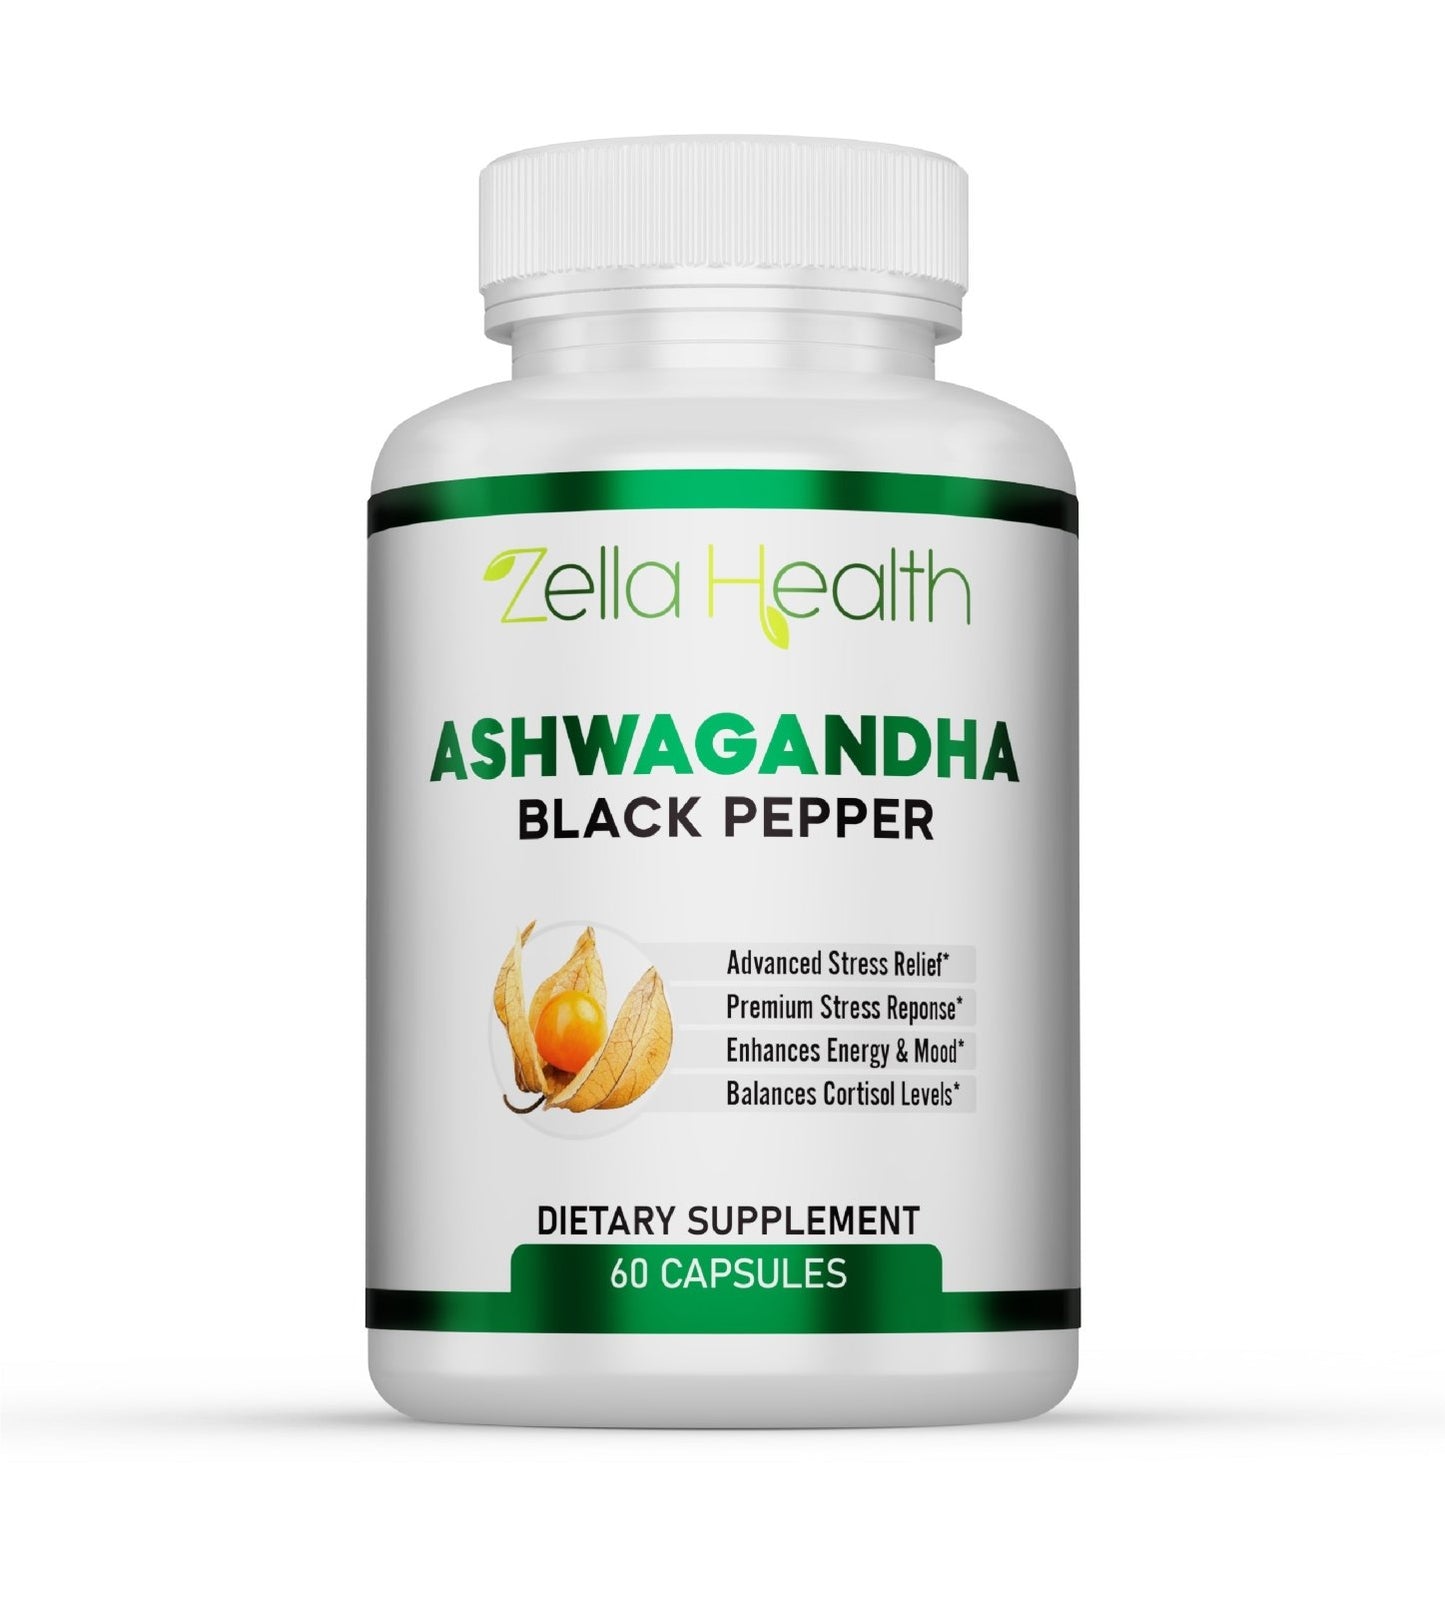 
                  
                    Ashwagandha 1300mg Made - Adrenal, Mood & Thyroid Support - Zella Health, 3 Month Supply 180 Capsules
                  
                